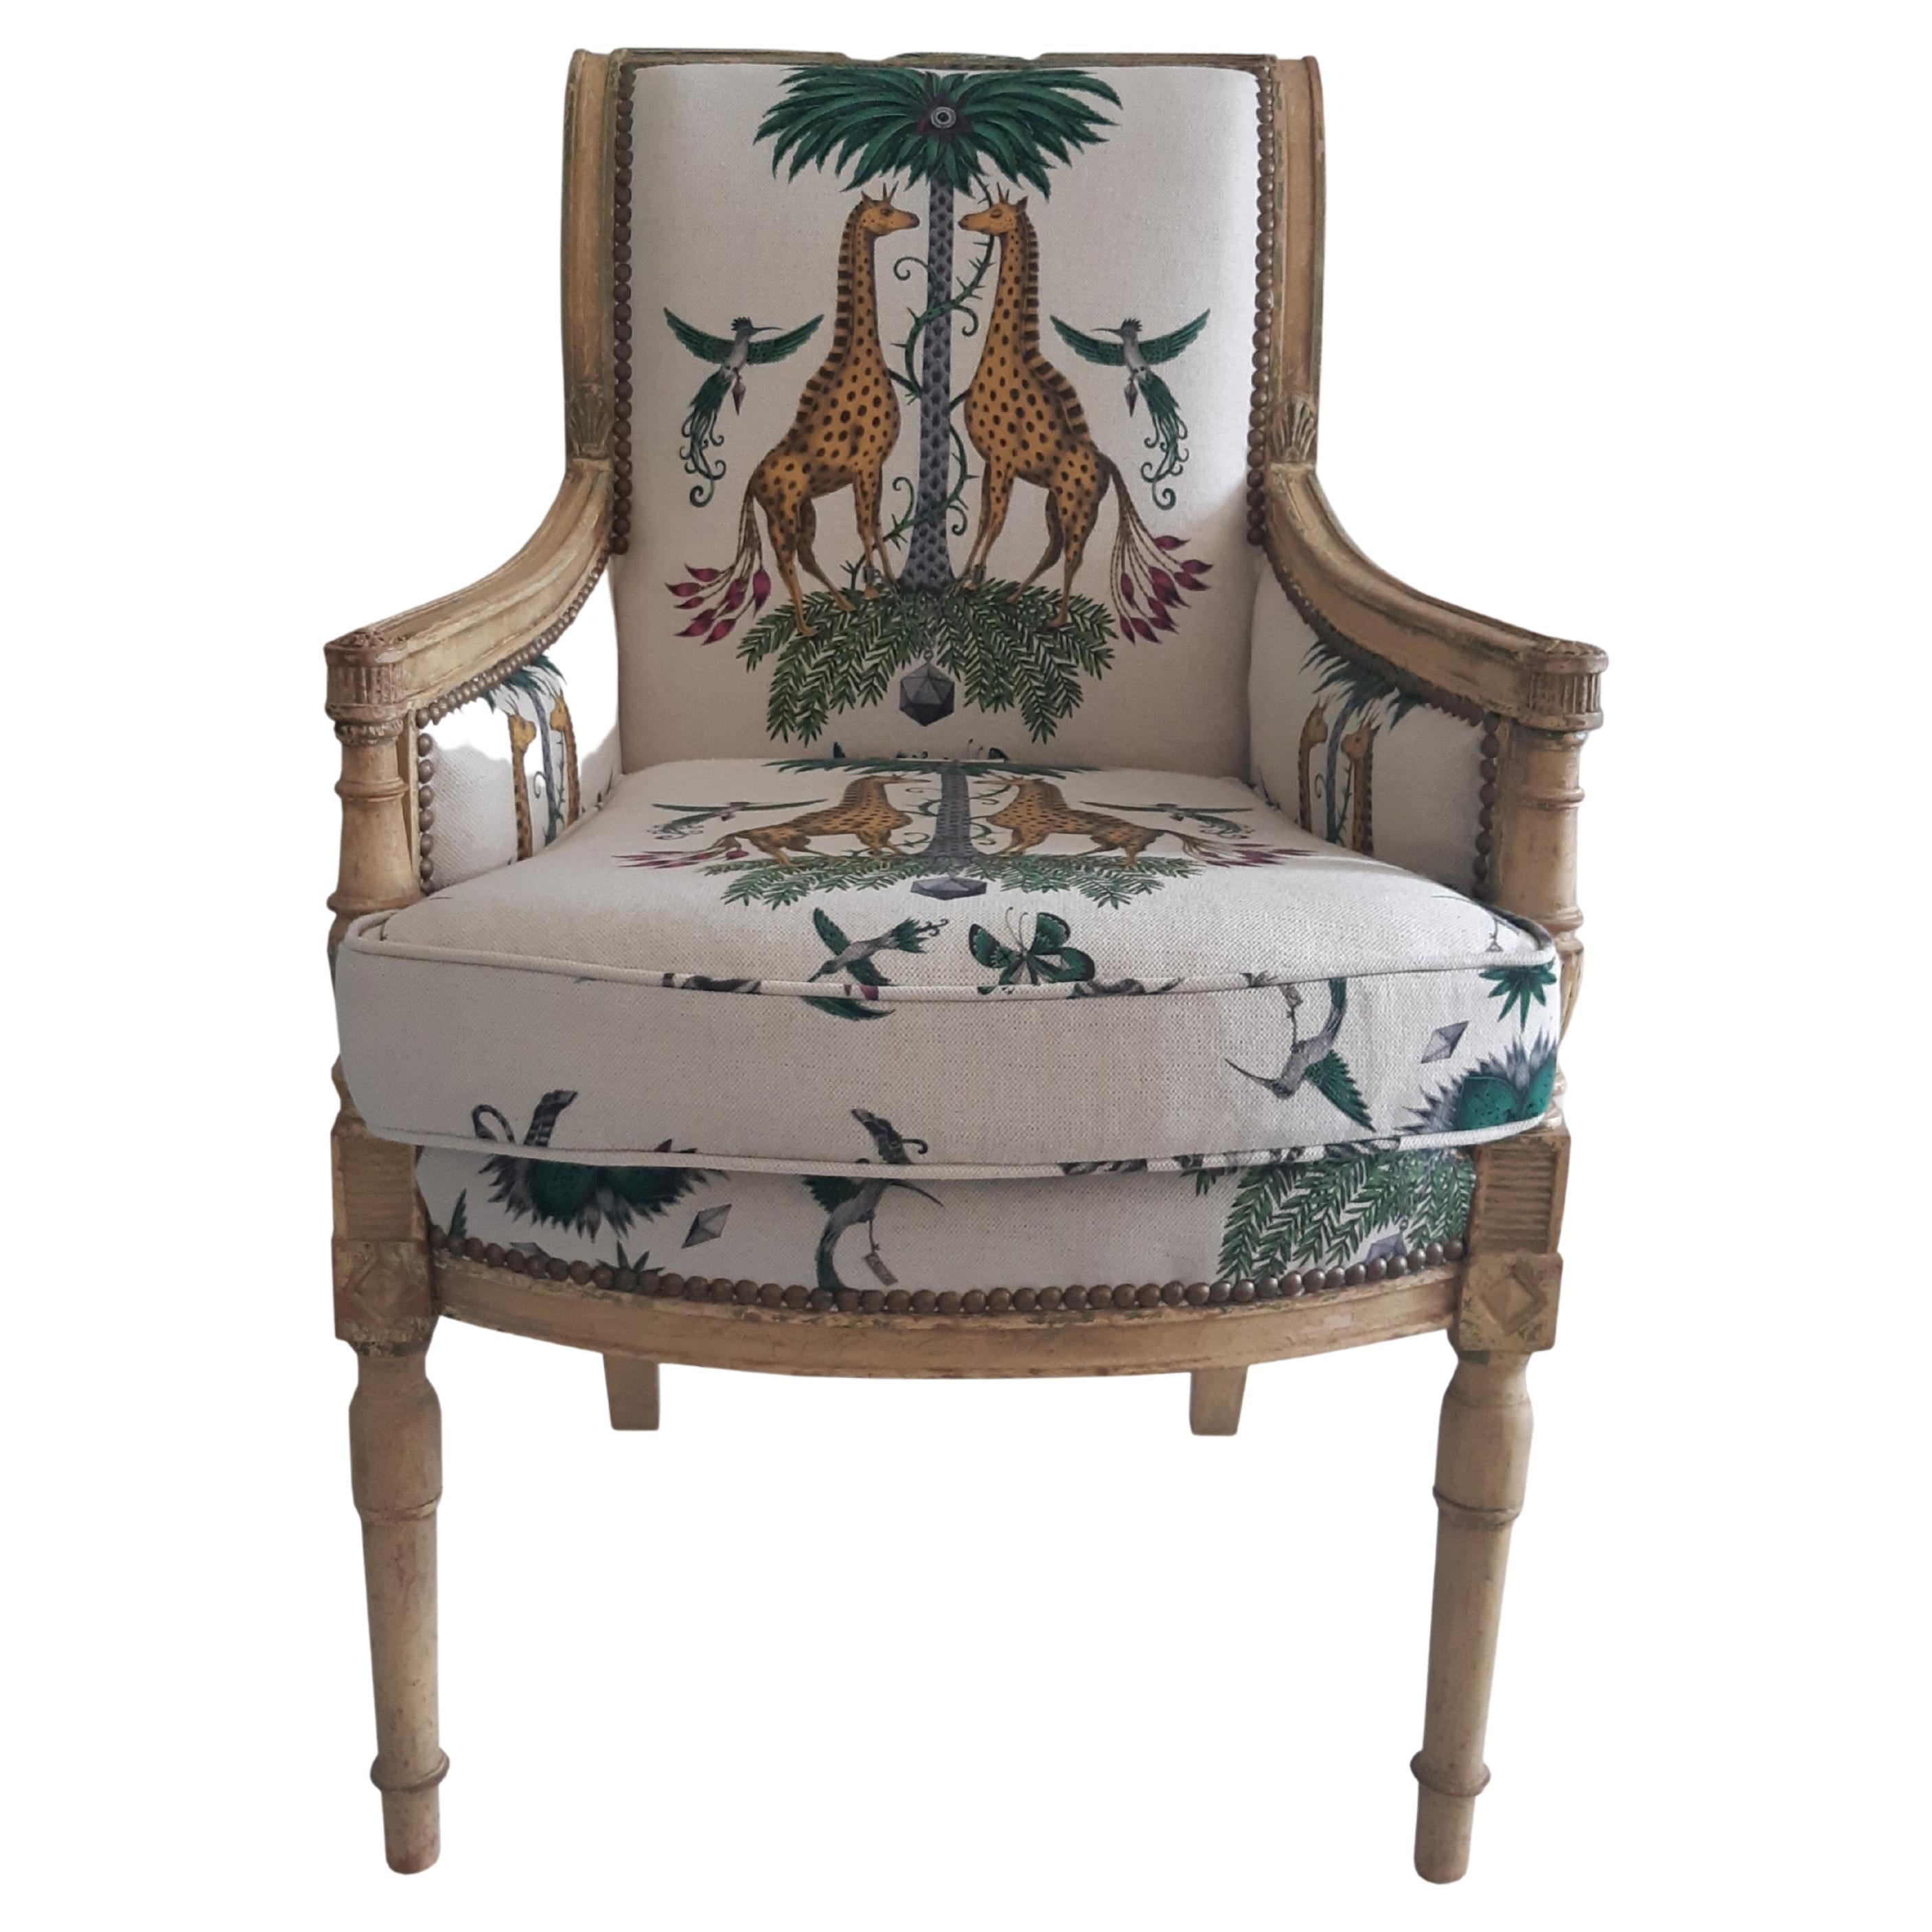 Charming Directoire style armchair, richly carved, in painted wood, the square backrest ending in a butt, baluster legs in front and two saber legs in the back.
Fabric from the house of clarke and clarke.
Restoration of the tapestry by a